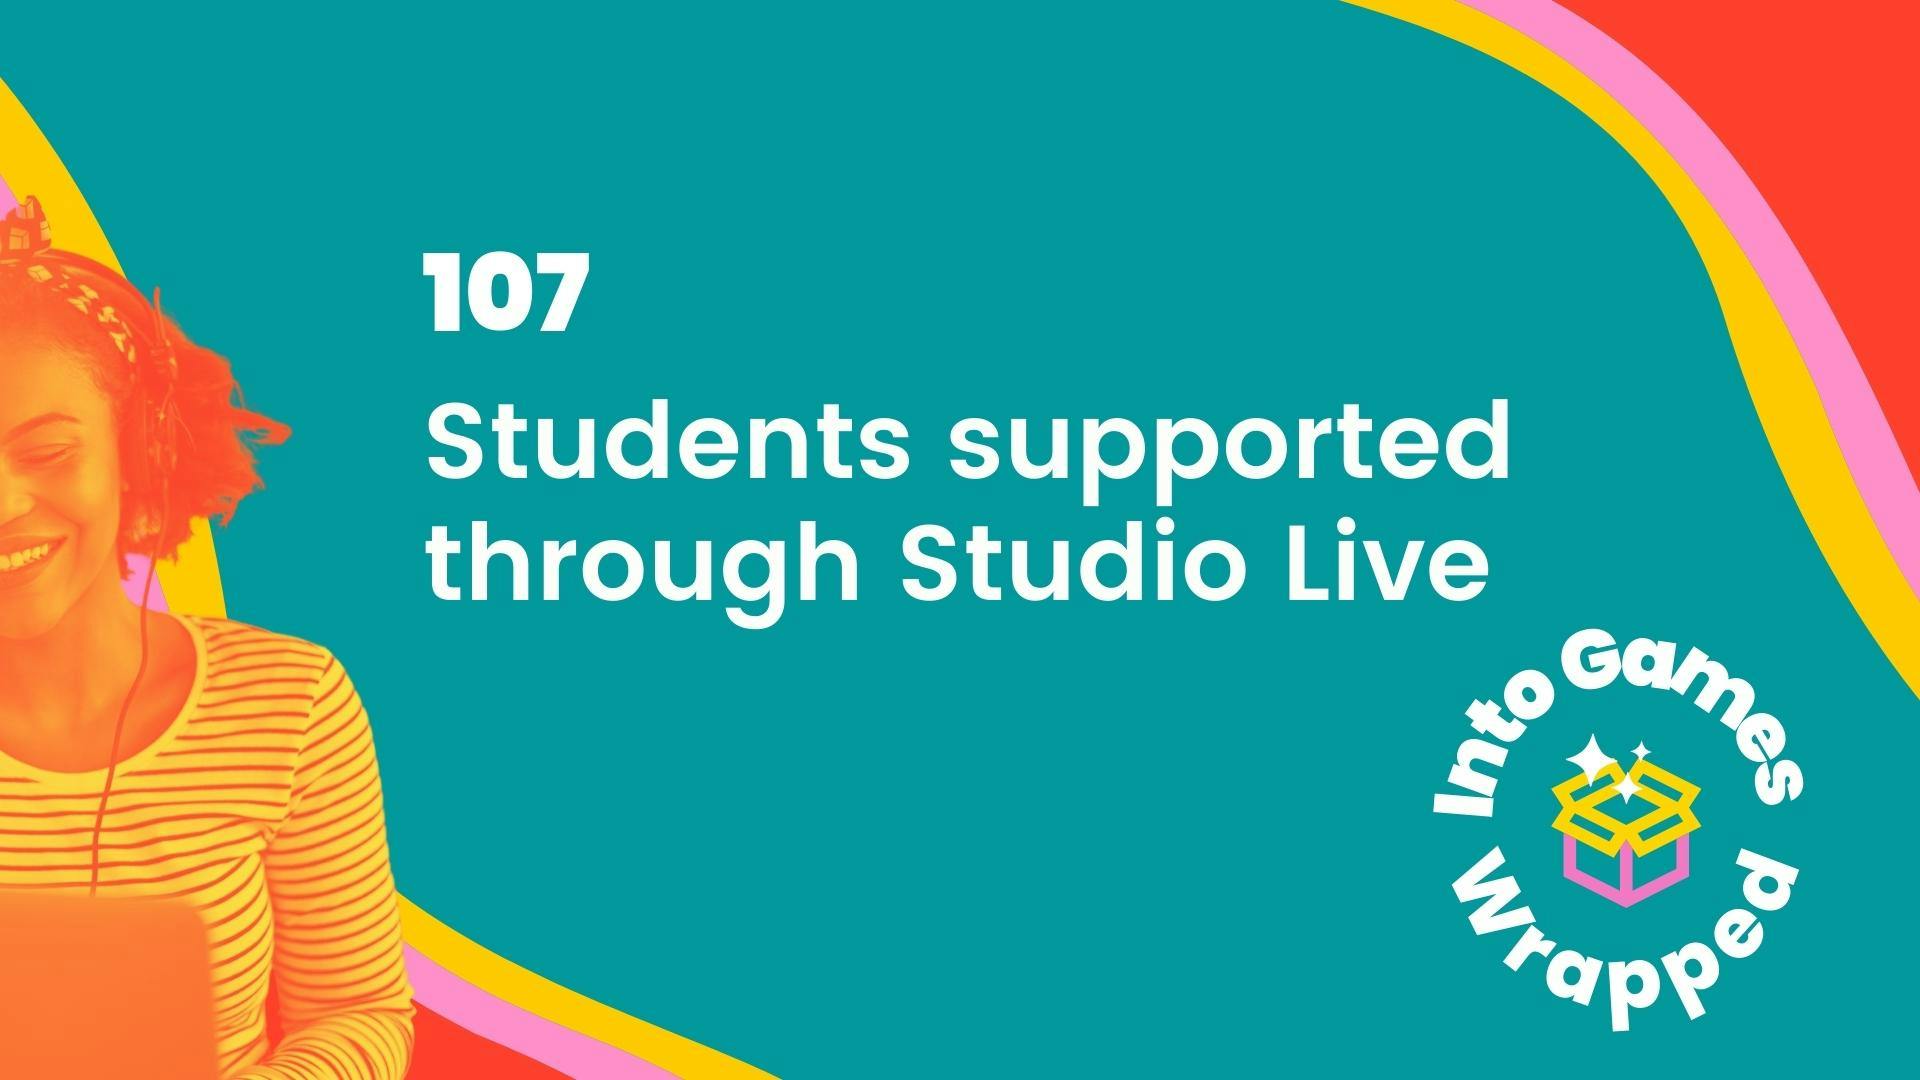 107 Students supported through Studio Live